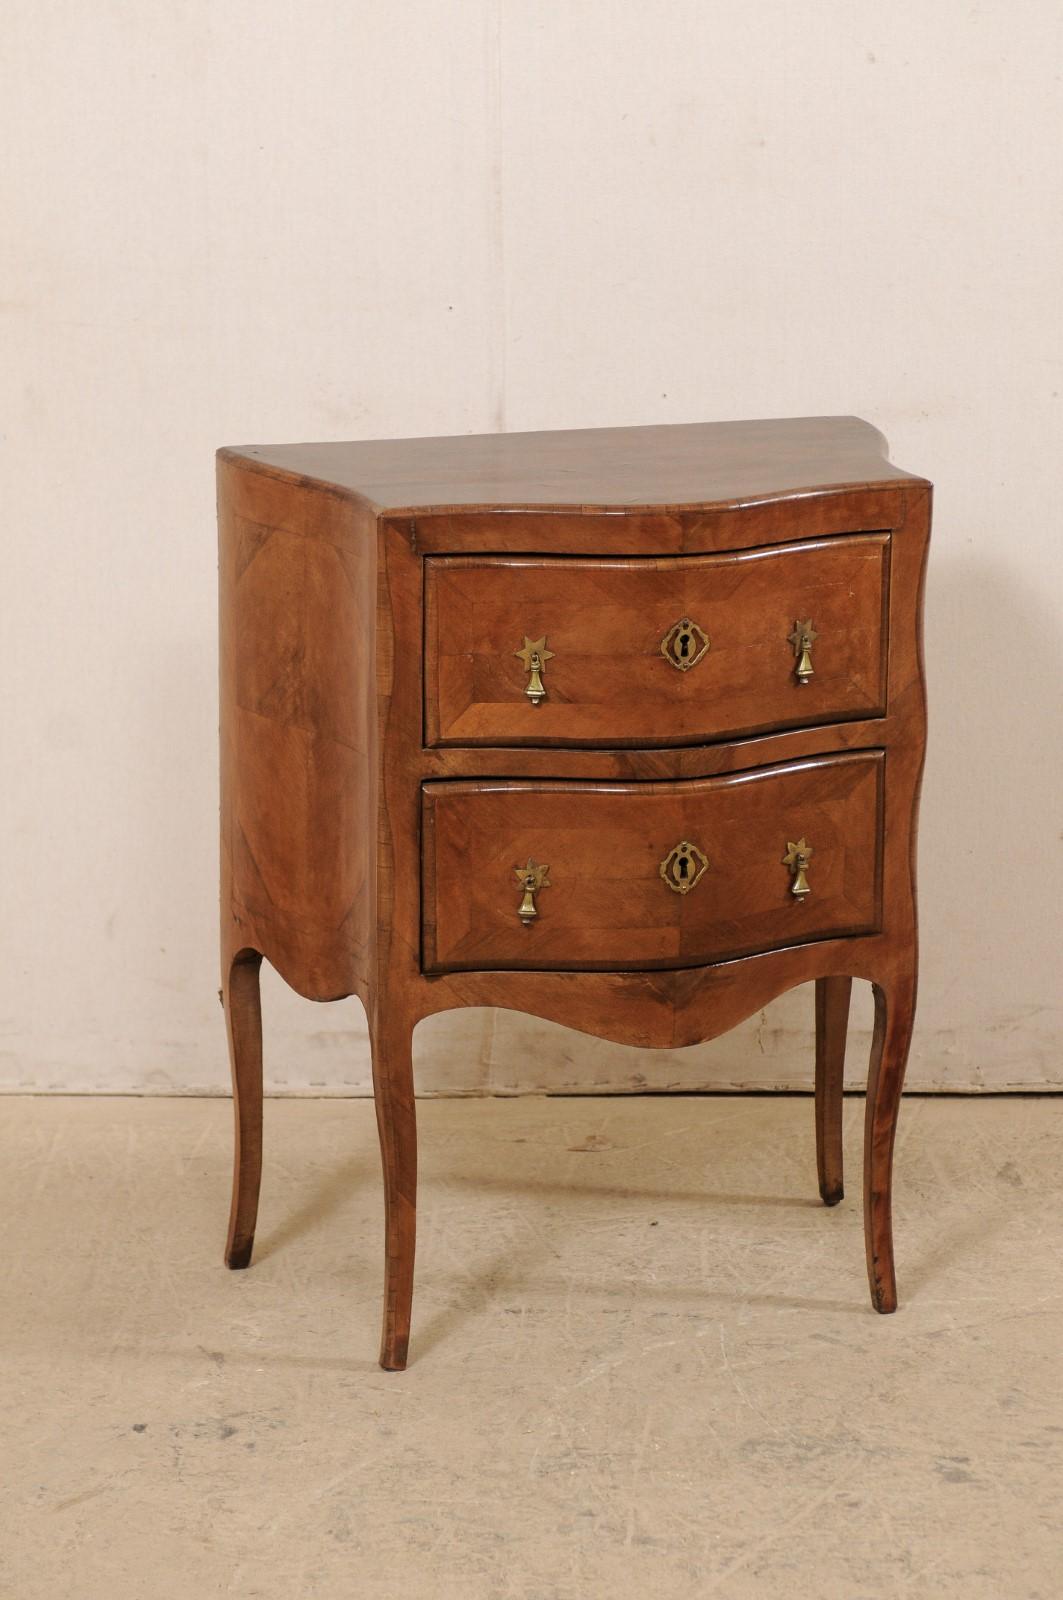 A French raised fruitwood side chest from the turn of the 18th and 19th century. This antique commode from France features a graceful serpentine shaped front and curvy sides, with rear being spread wider than frontside. There is a lovely banding and